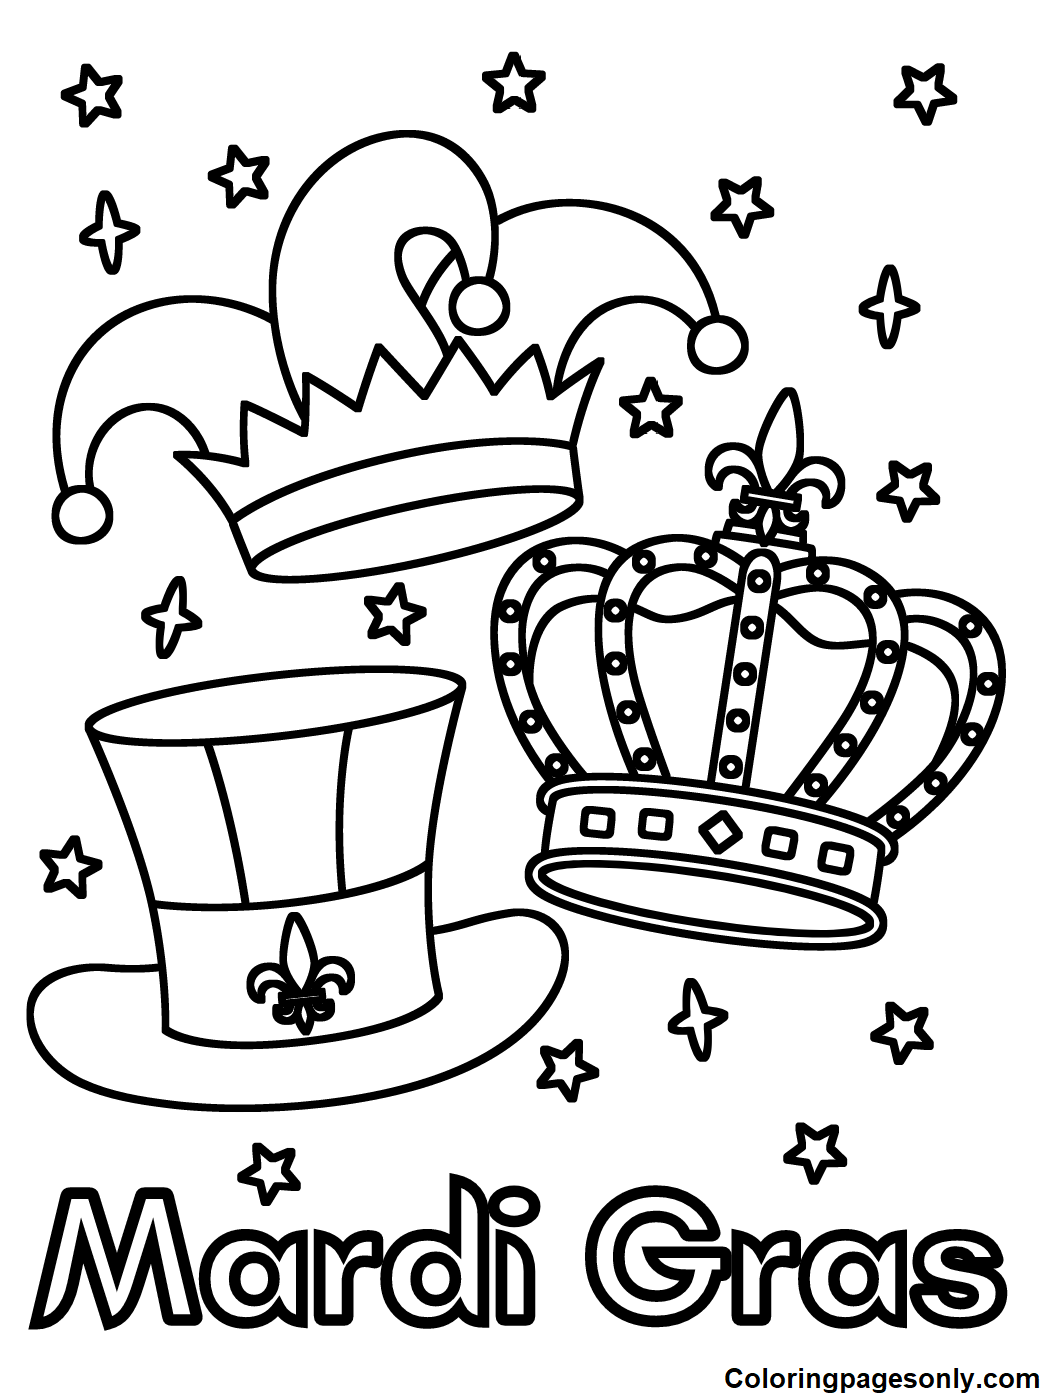 Mardi Gras Picture to Print Coloring Pages